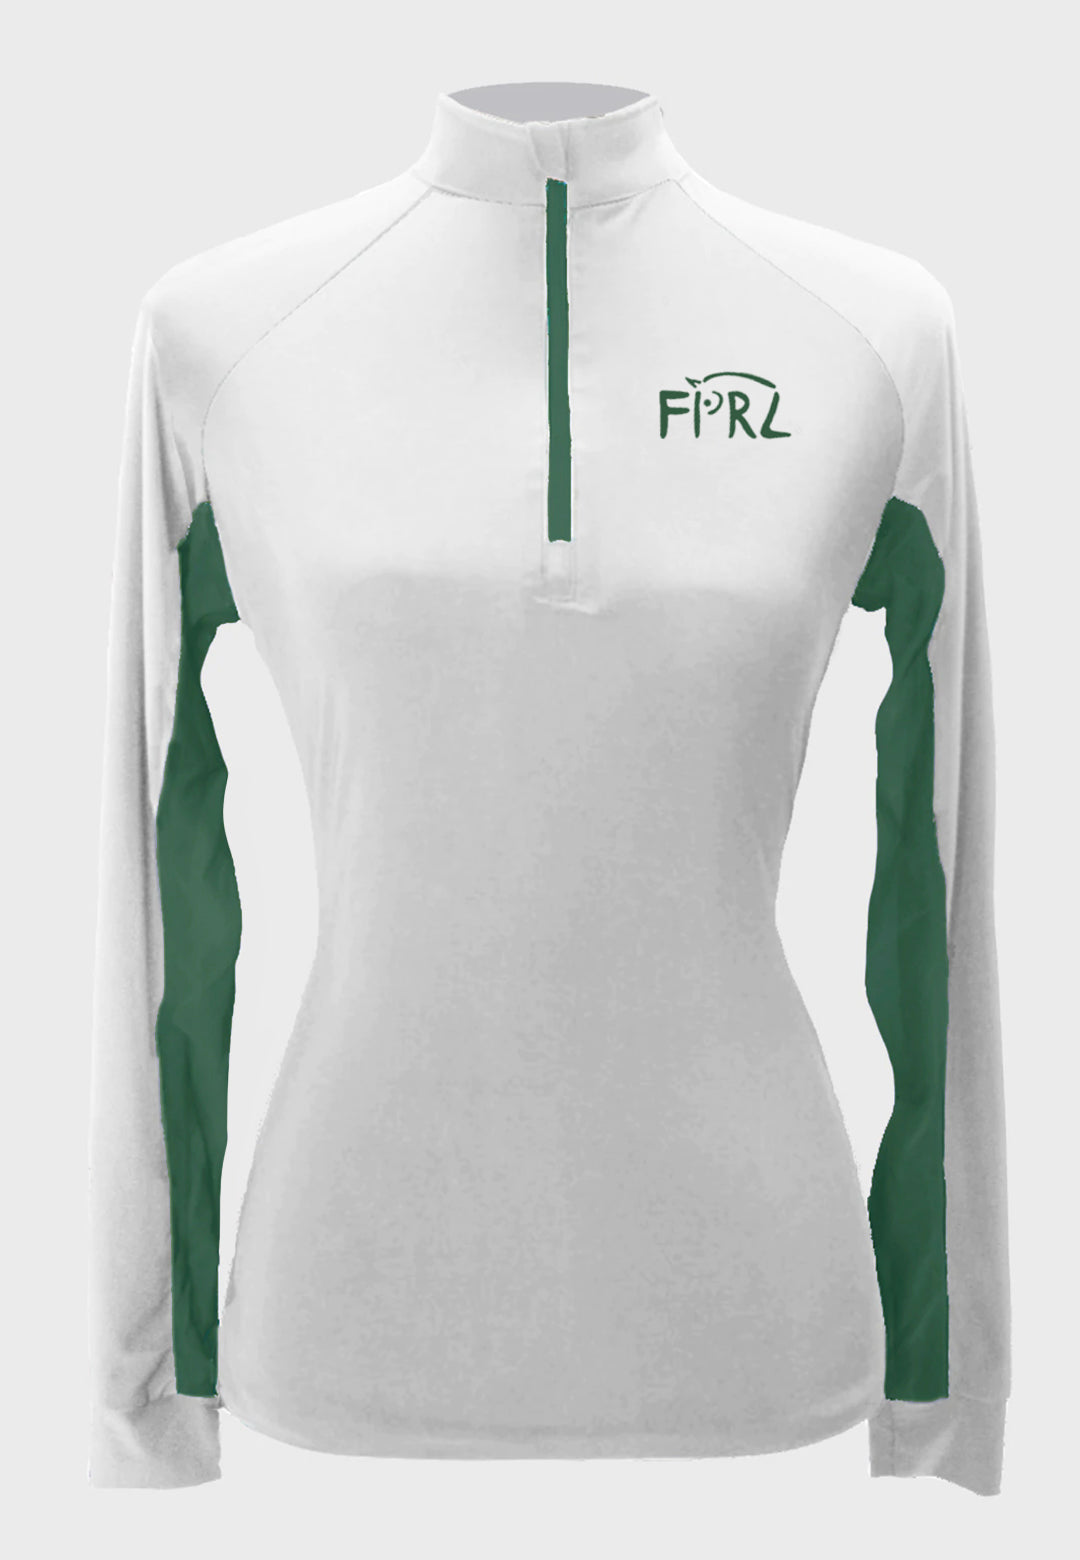 Flanders Polo White Sun Shirt with Green Accents -    Adult + Youth sizes